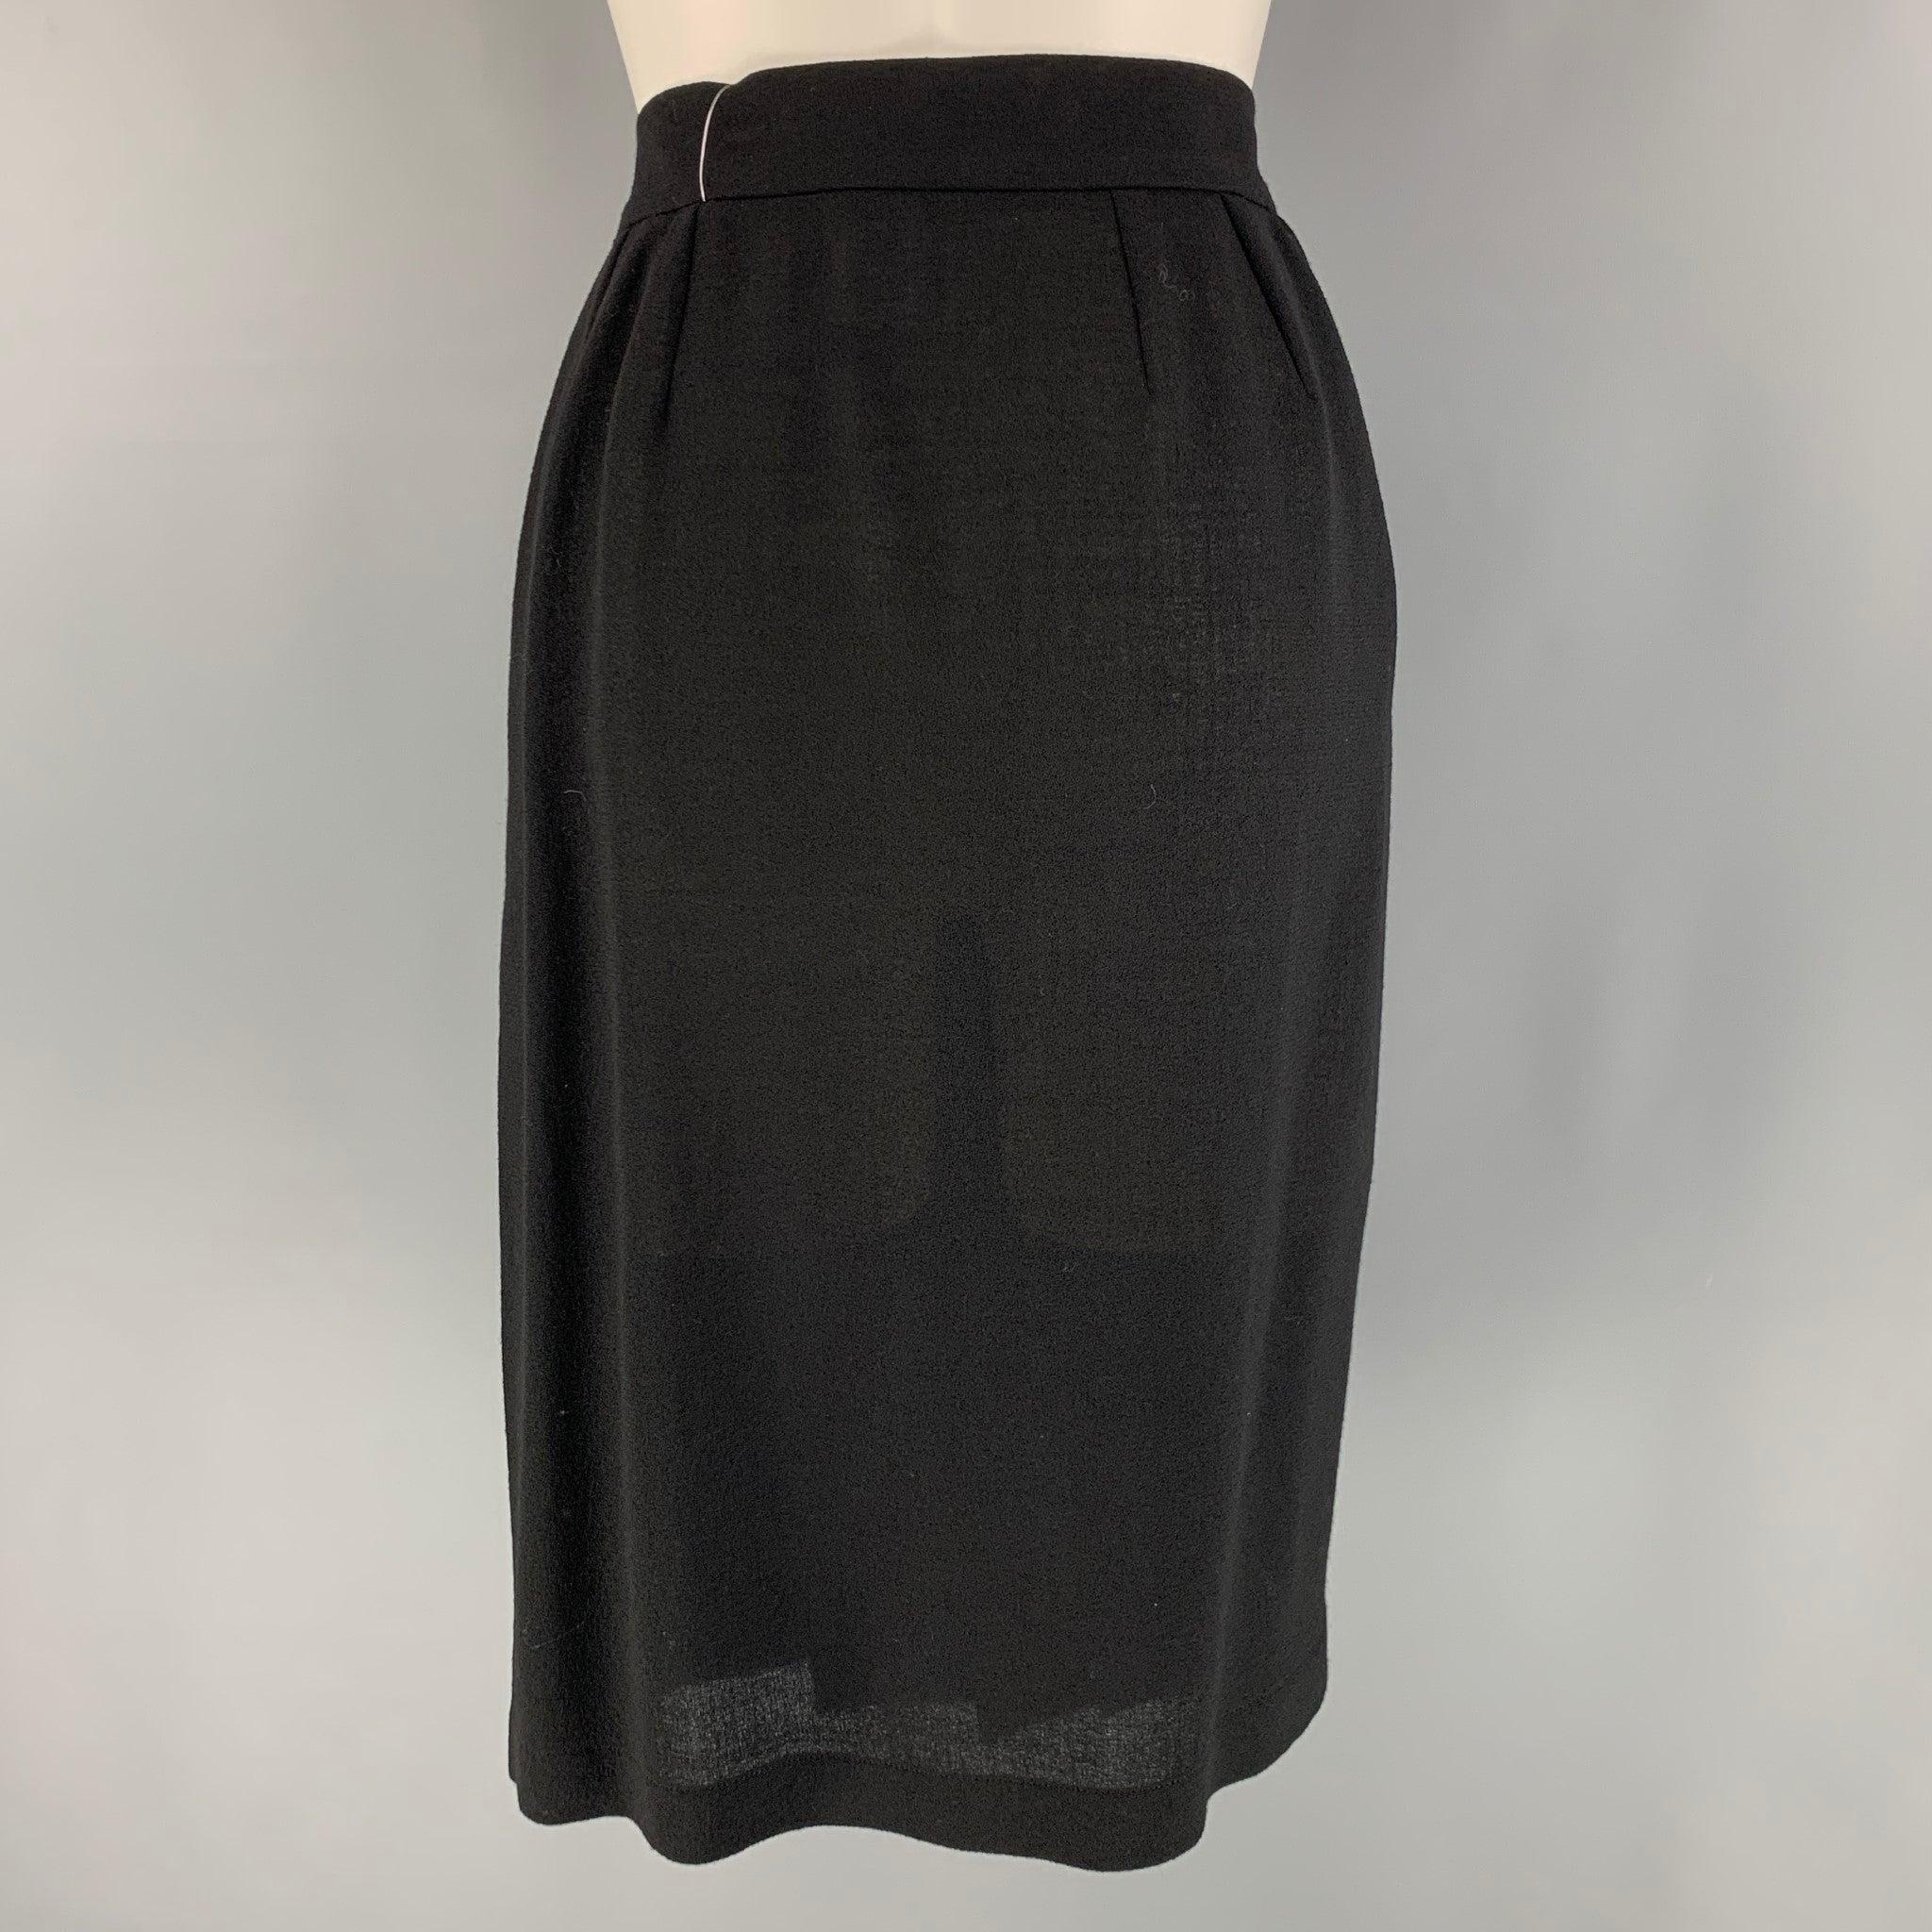 YVES SAINT LAURENT 'Rive Gauche' knee high skirt comes in a black wool material featuring a wrap style, front drape and pleated detail, and hook closure. Made in France.Very Good Pre-Owned Condition. 

Marked:   38 

Measurements: 
  Waist: 28